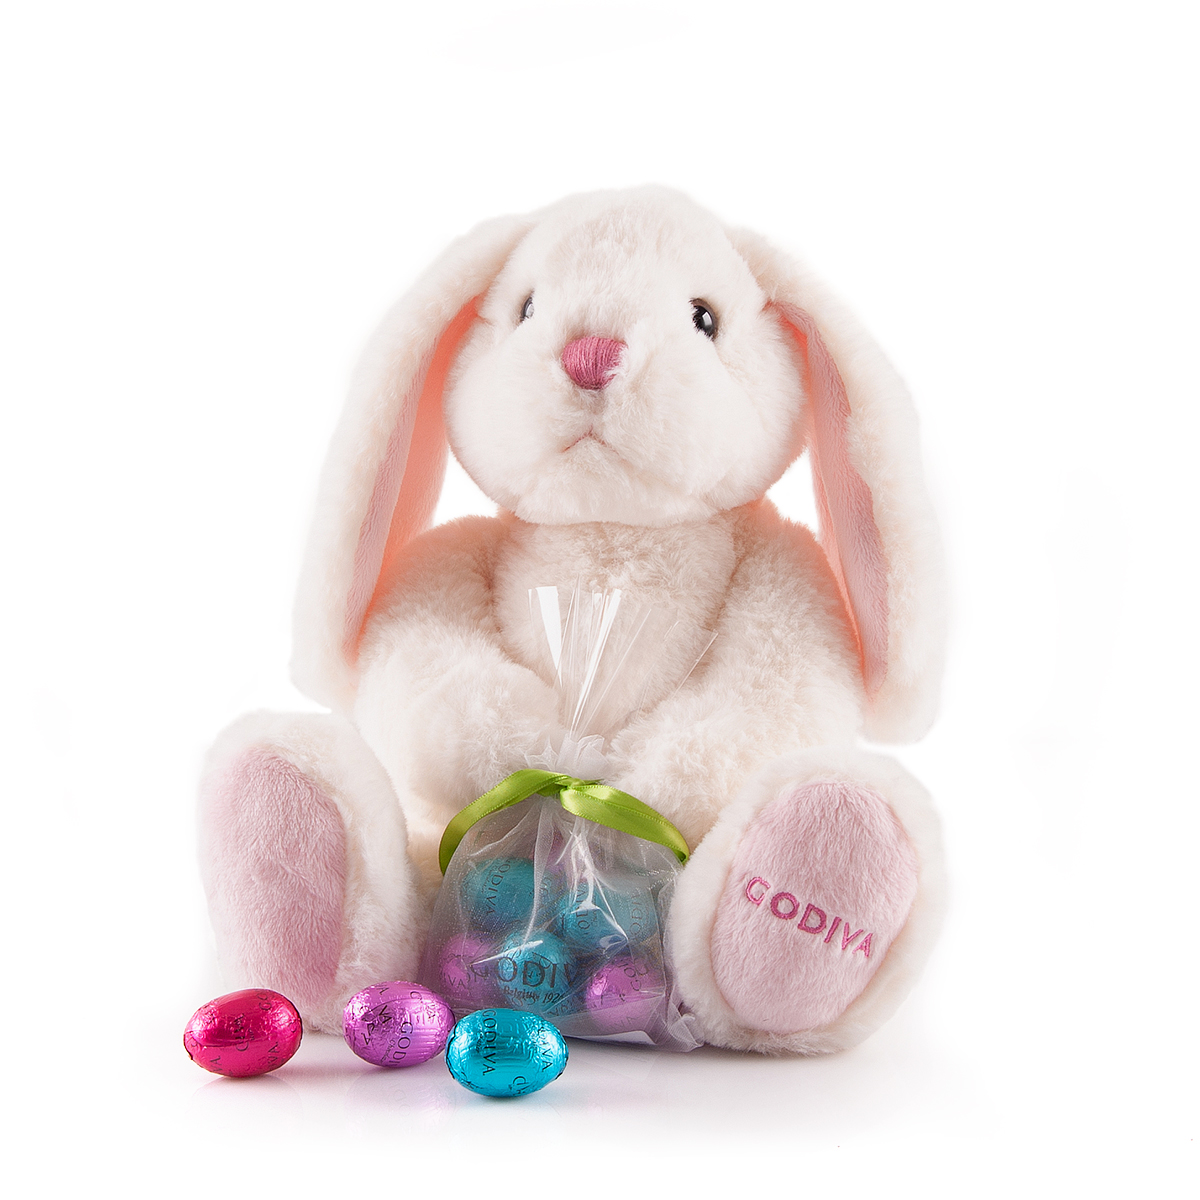 A lovable fluffy Easter bunny with 8 milk and white Godiva chocolate eggs is an Easter gift to be cherished.